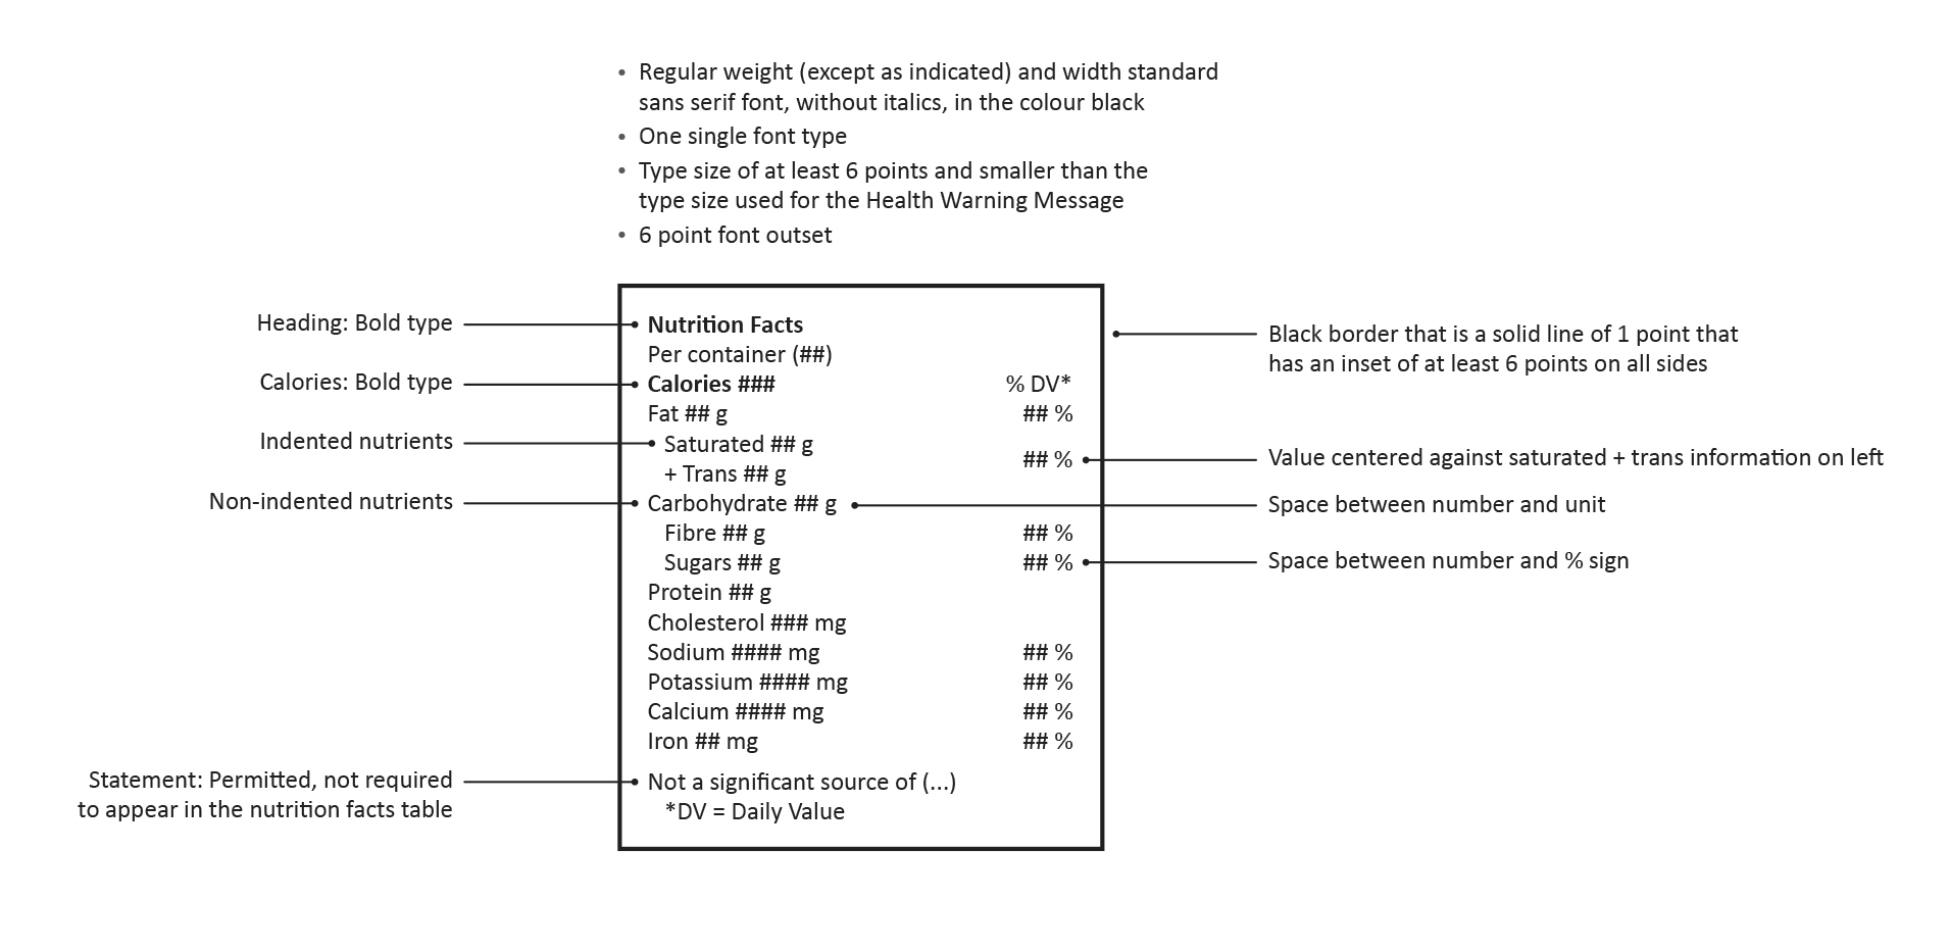 Figure 1. Proposed cannabis-specific nutrition facts table